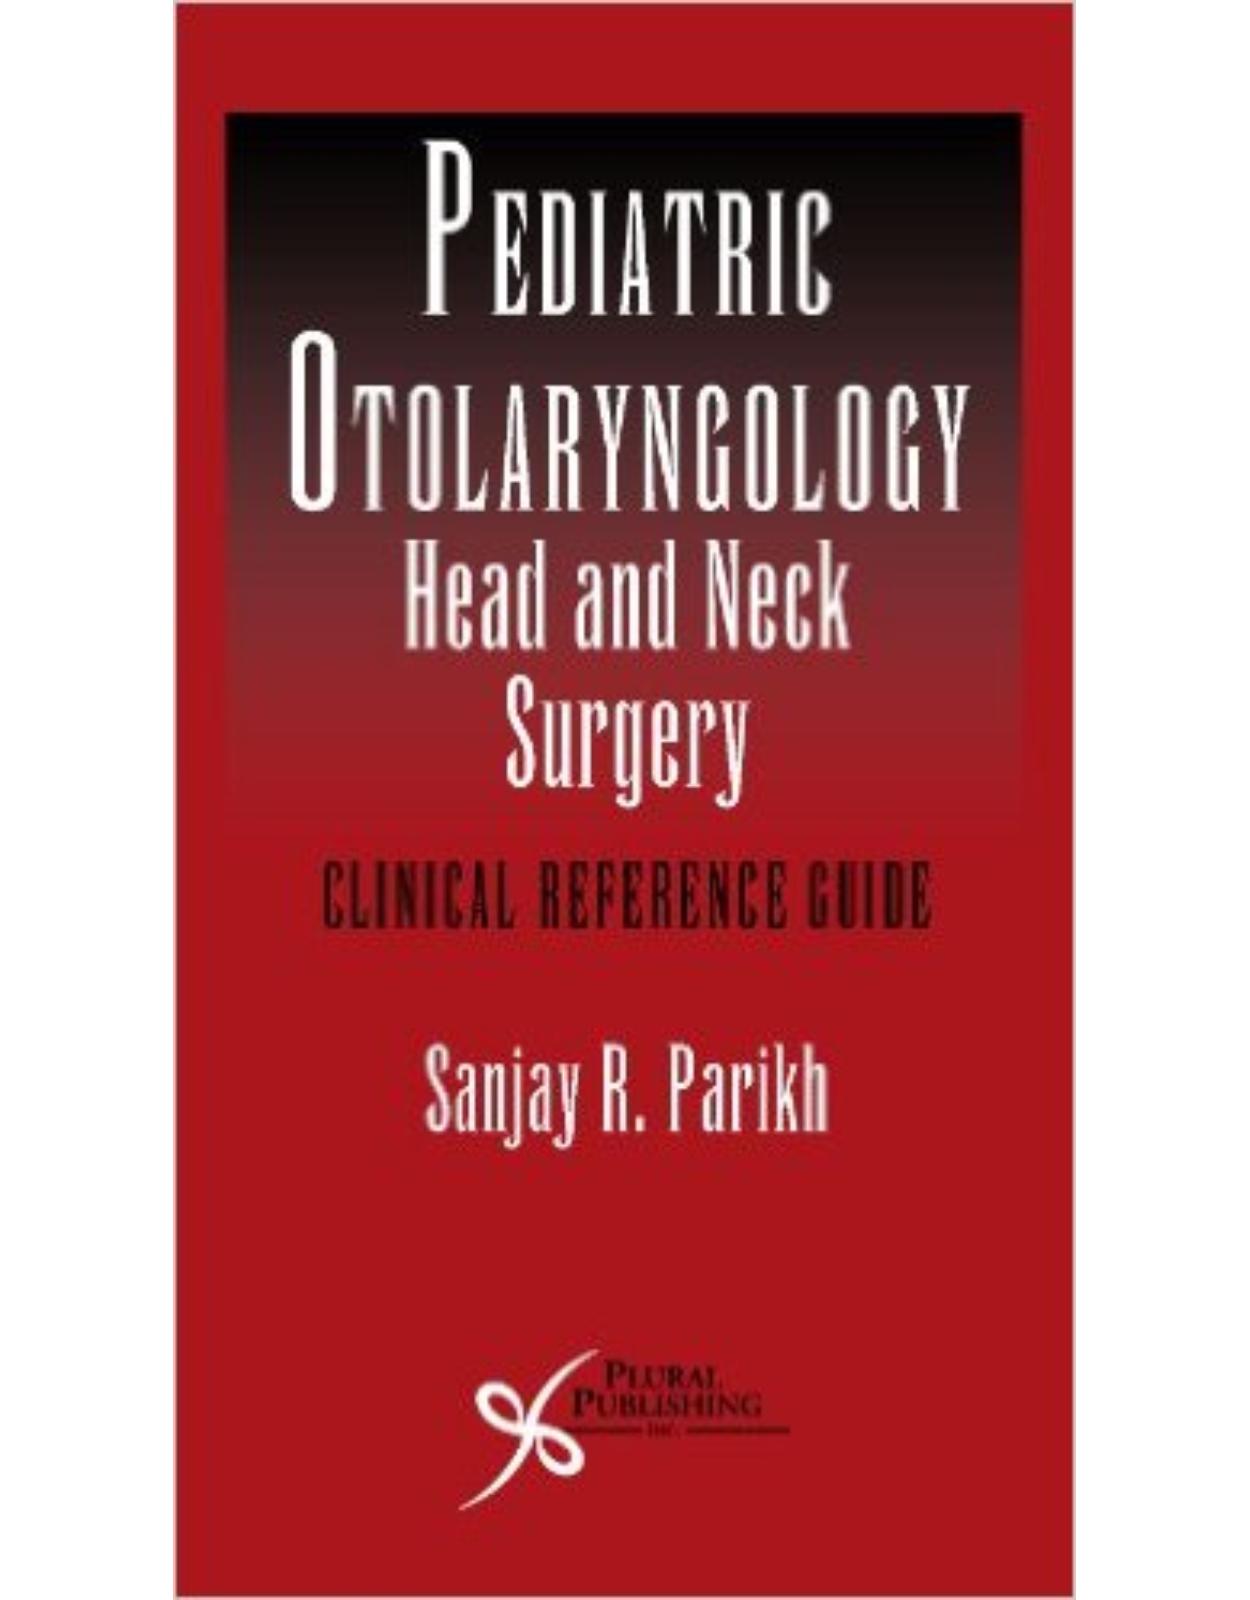 Pediatric Otolaryngology - Head and Neck Surgery: Clinical Reference Guide